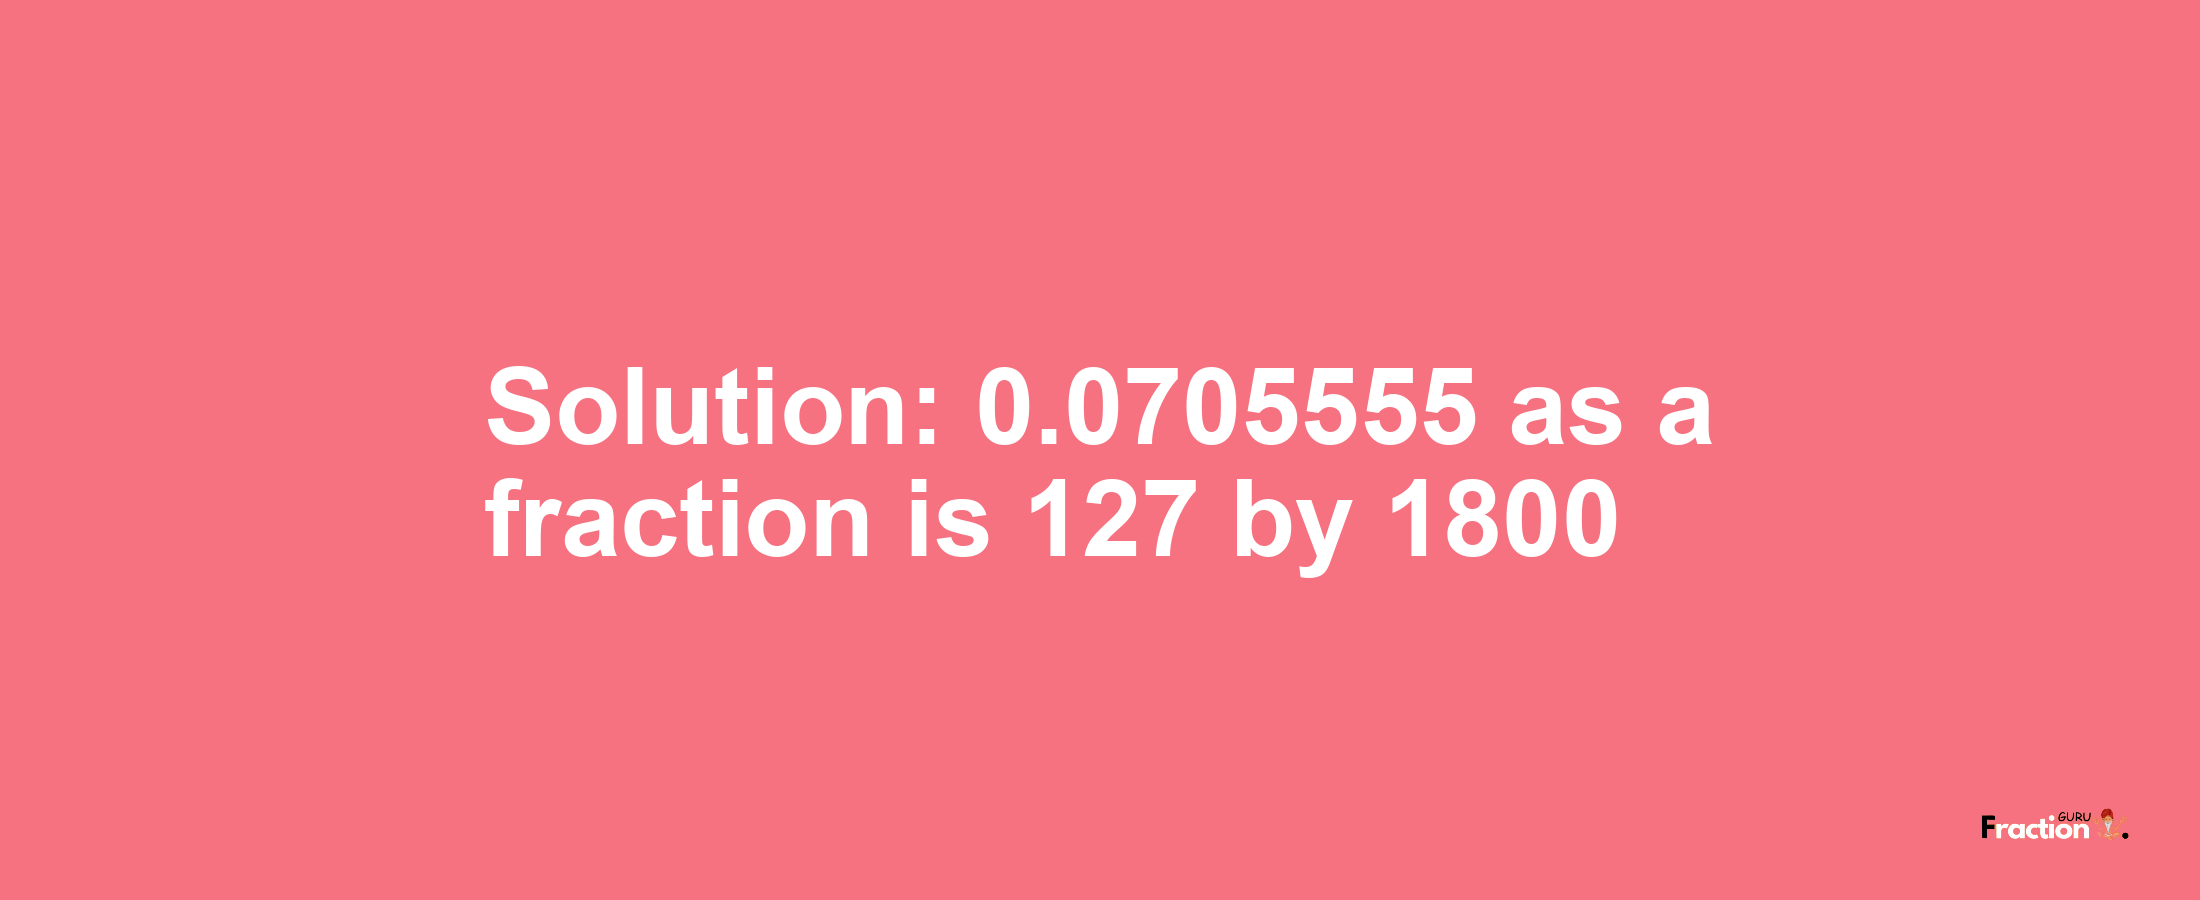 Solution:0.0705555 as a fraction is 127/1800